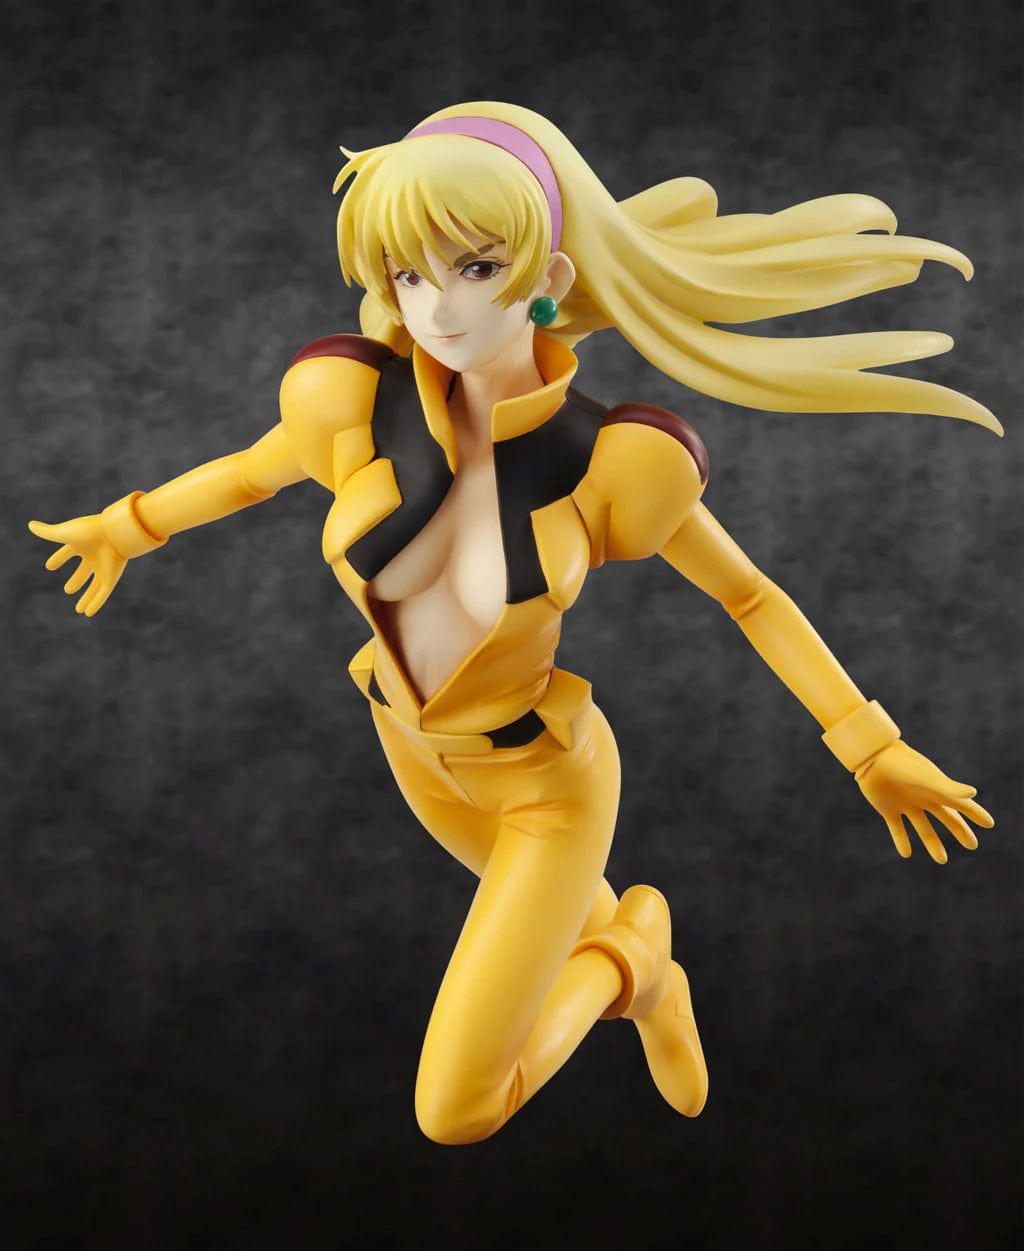 Megahouse EXCELLENT MODEL SERIES RAHDX G.A.NEO MOBILE SUIT VICTORY GUNDAM Loos Katejina (Repeat)